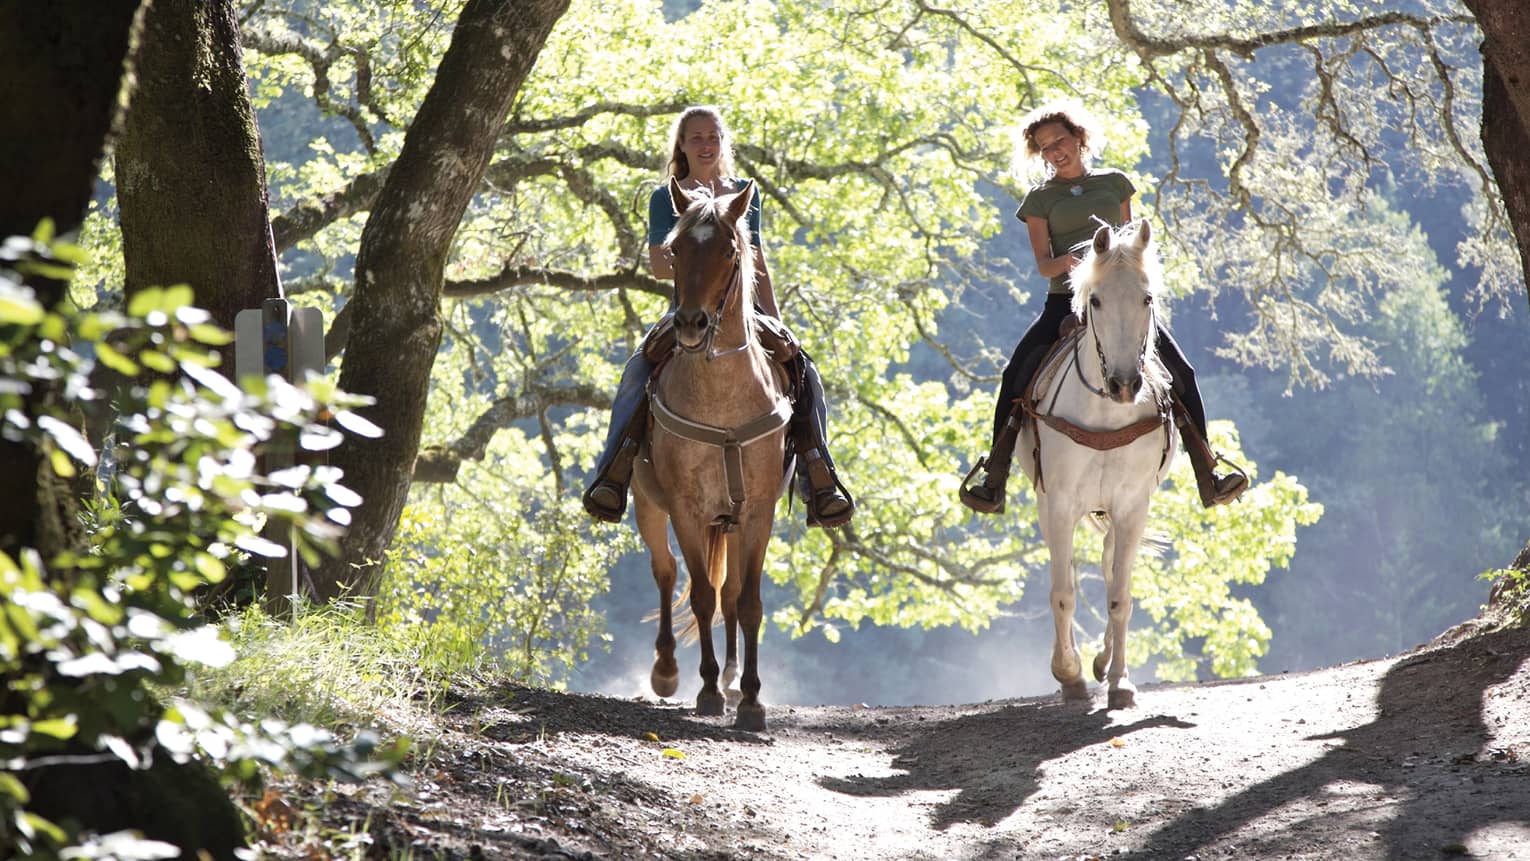 Two smiling women horseback riding on sunny path, one on brown horse and one on white horse